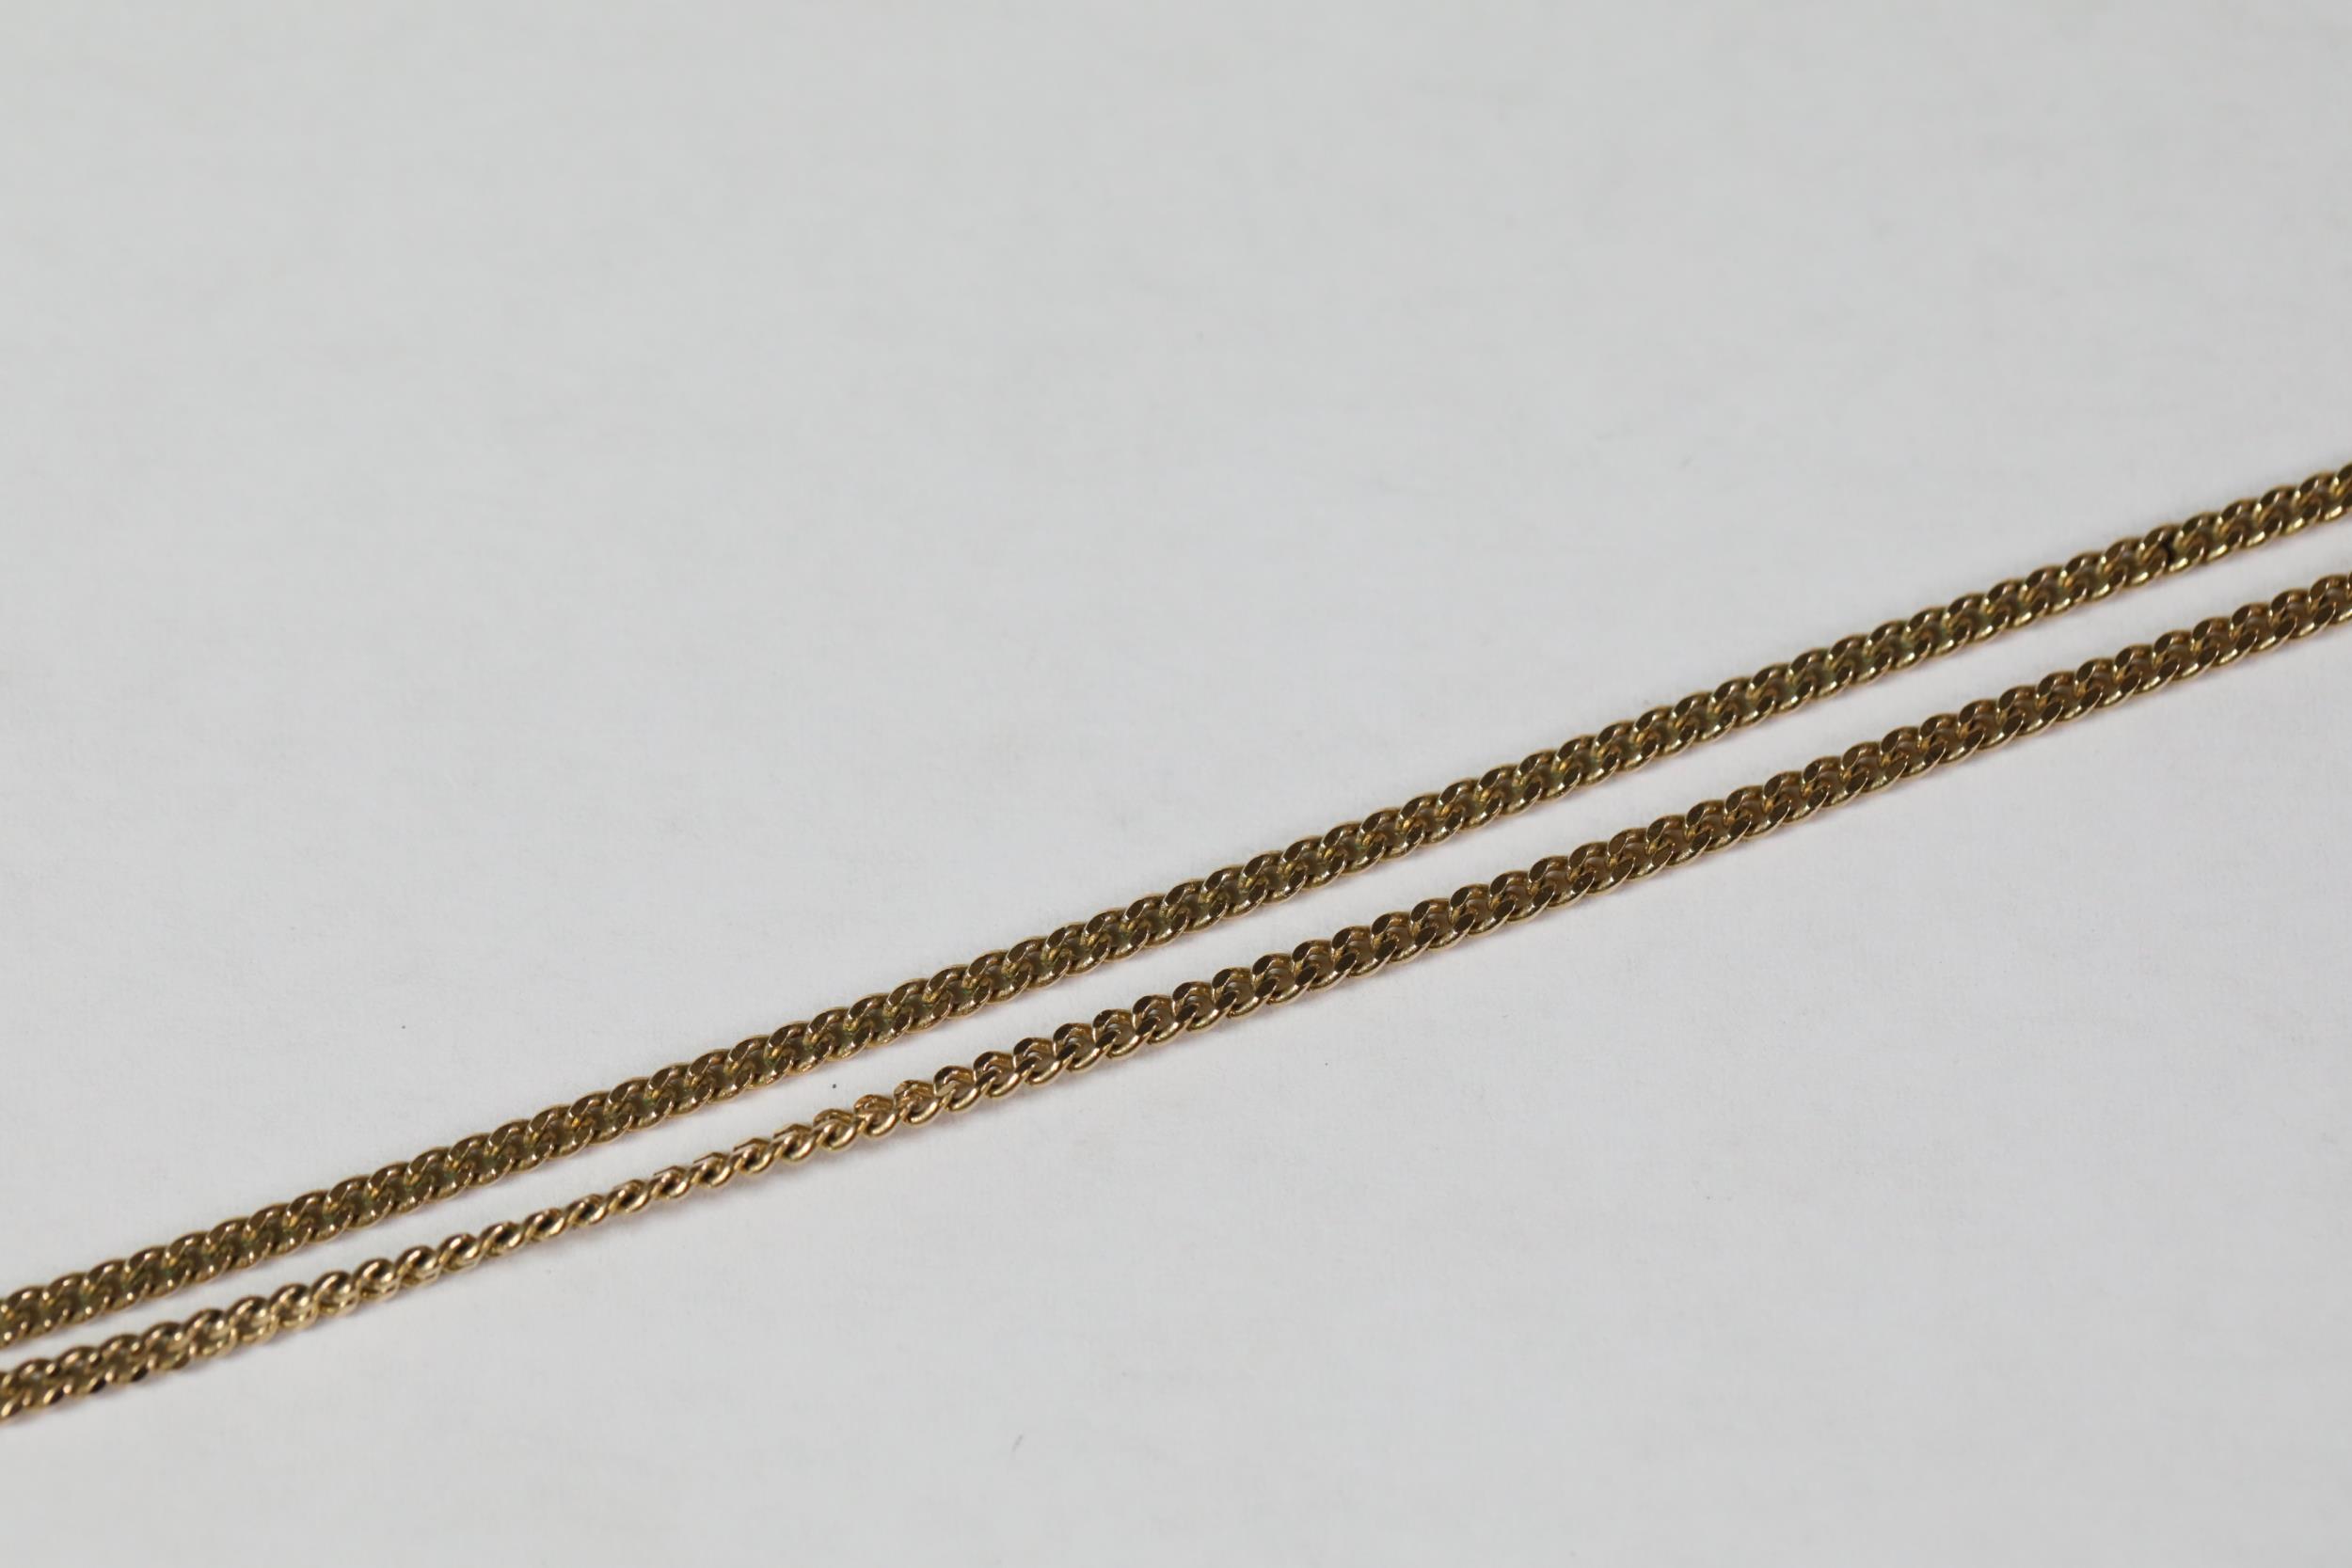 Collection of 3 Gold Chains - Image 5 of 12